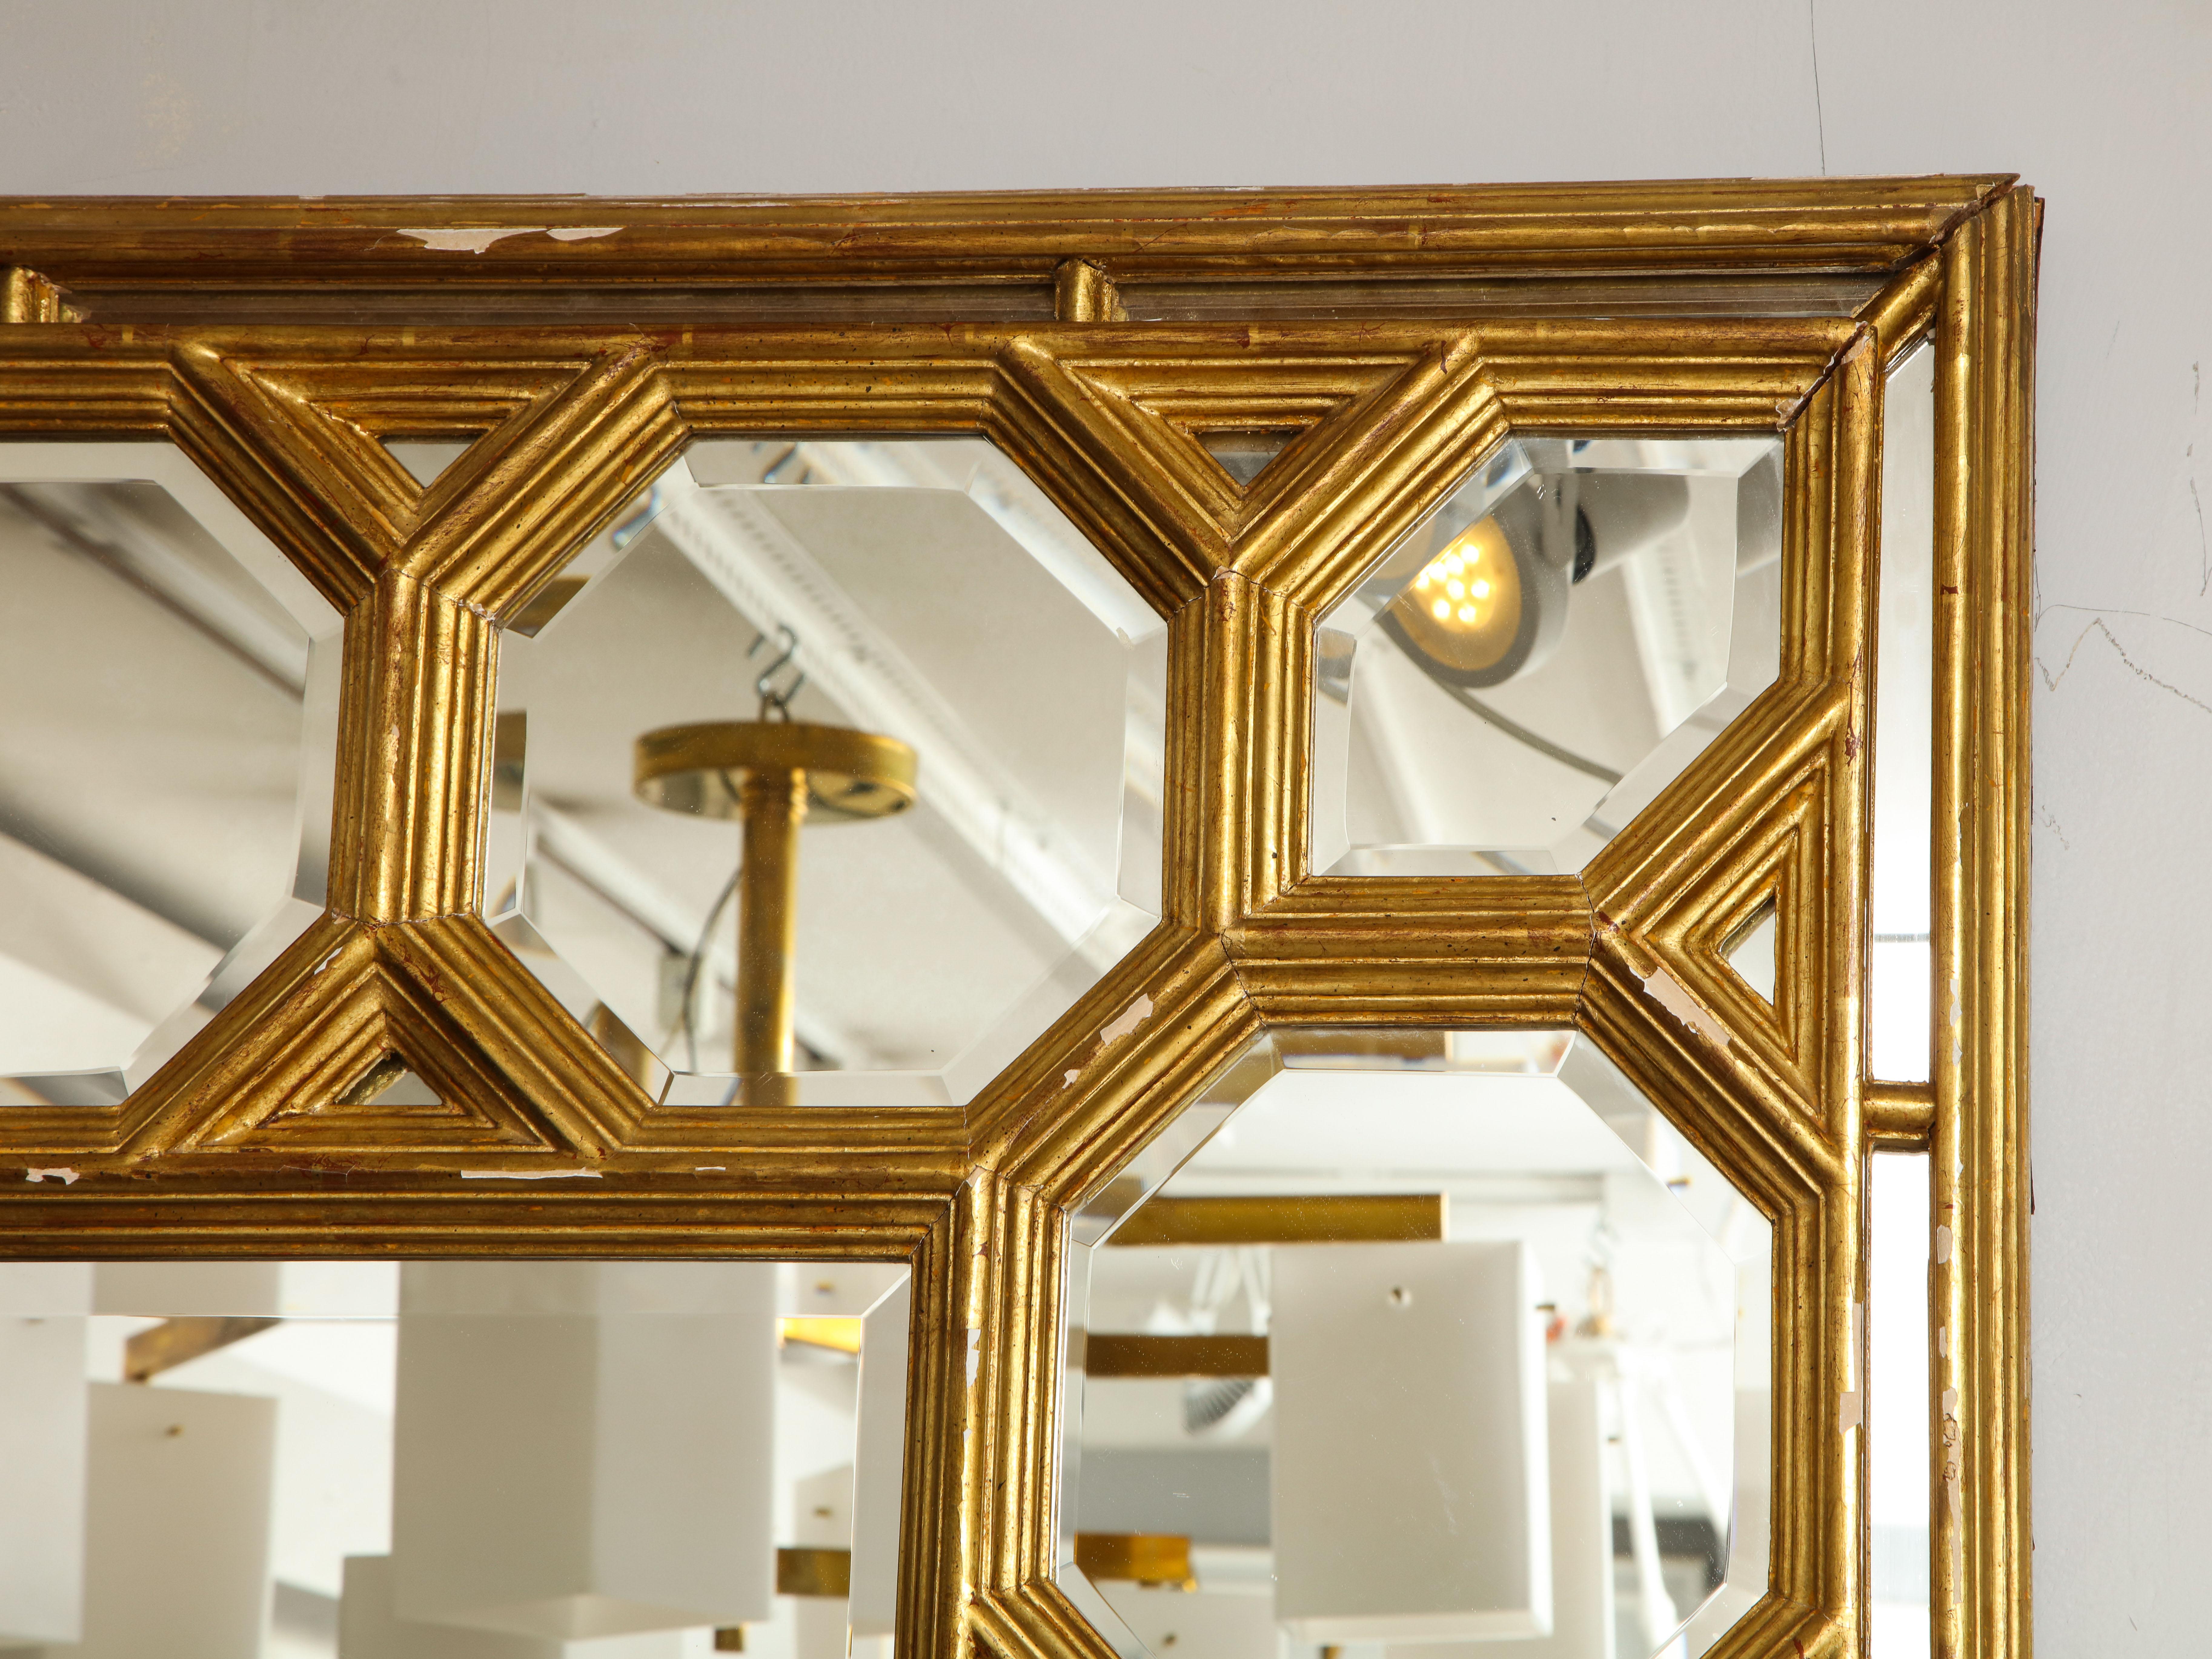 Italian Hand Carved Giltwood Mirror with Octagonal Design Along Border